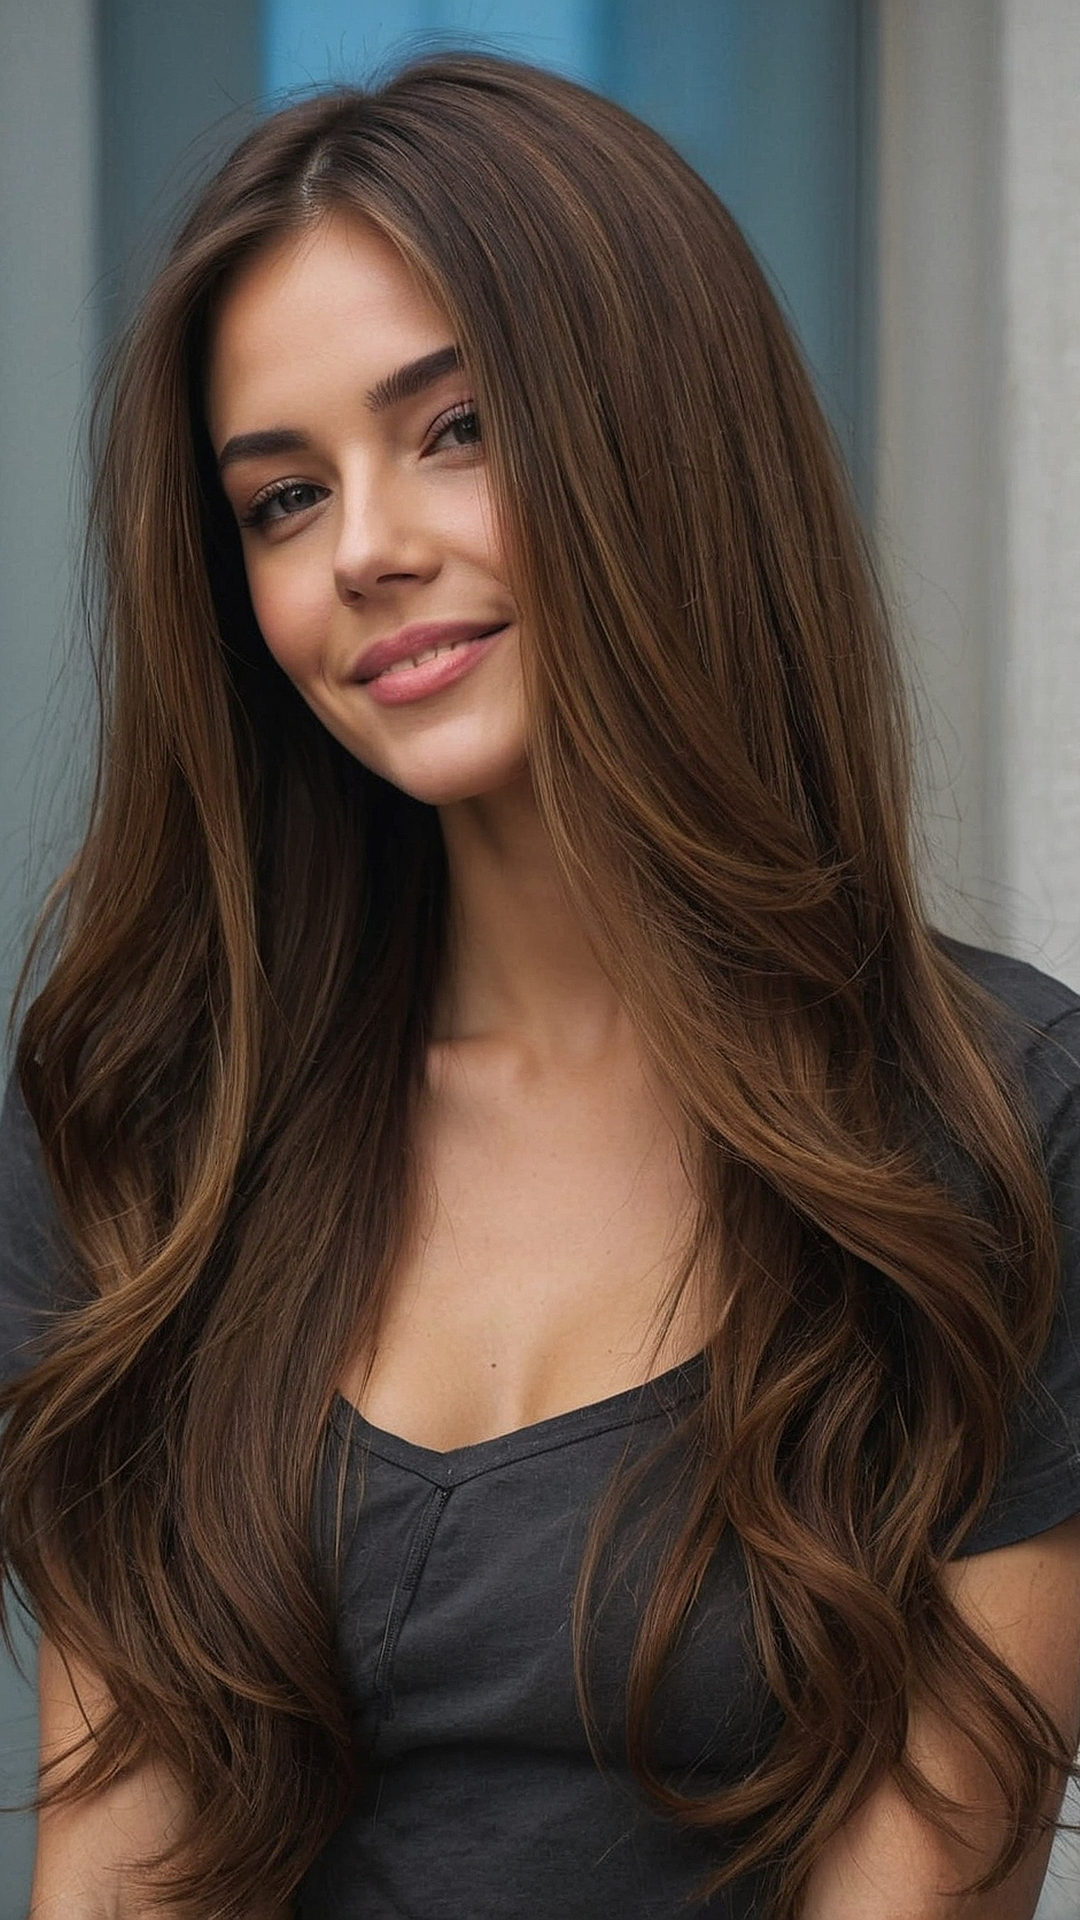 Polished Perfection: Women's Straight Hair Looks